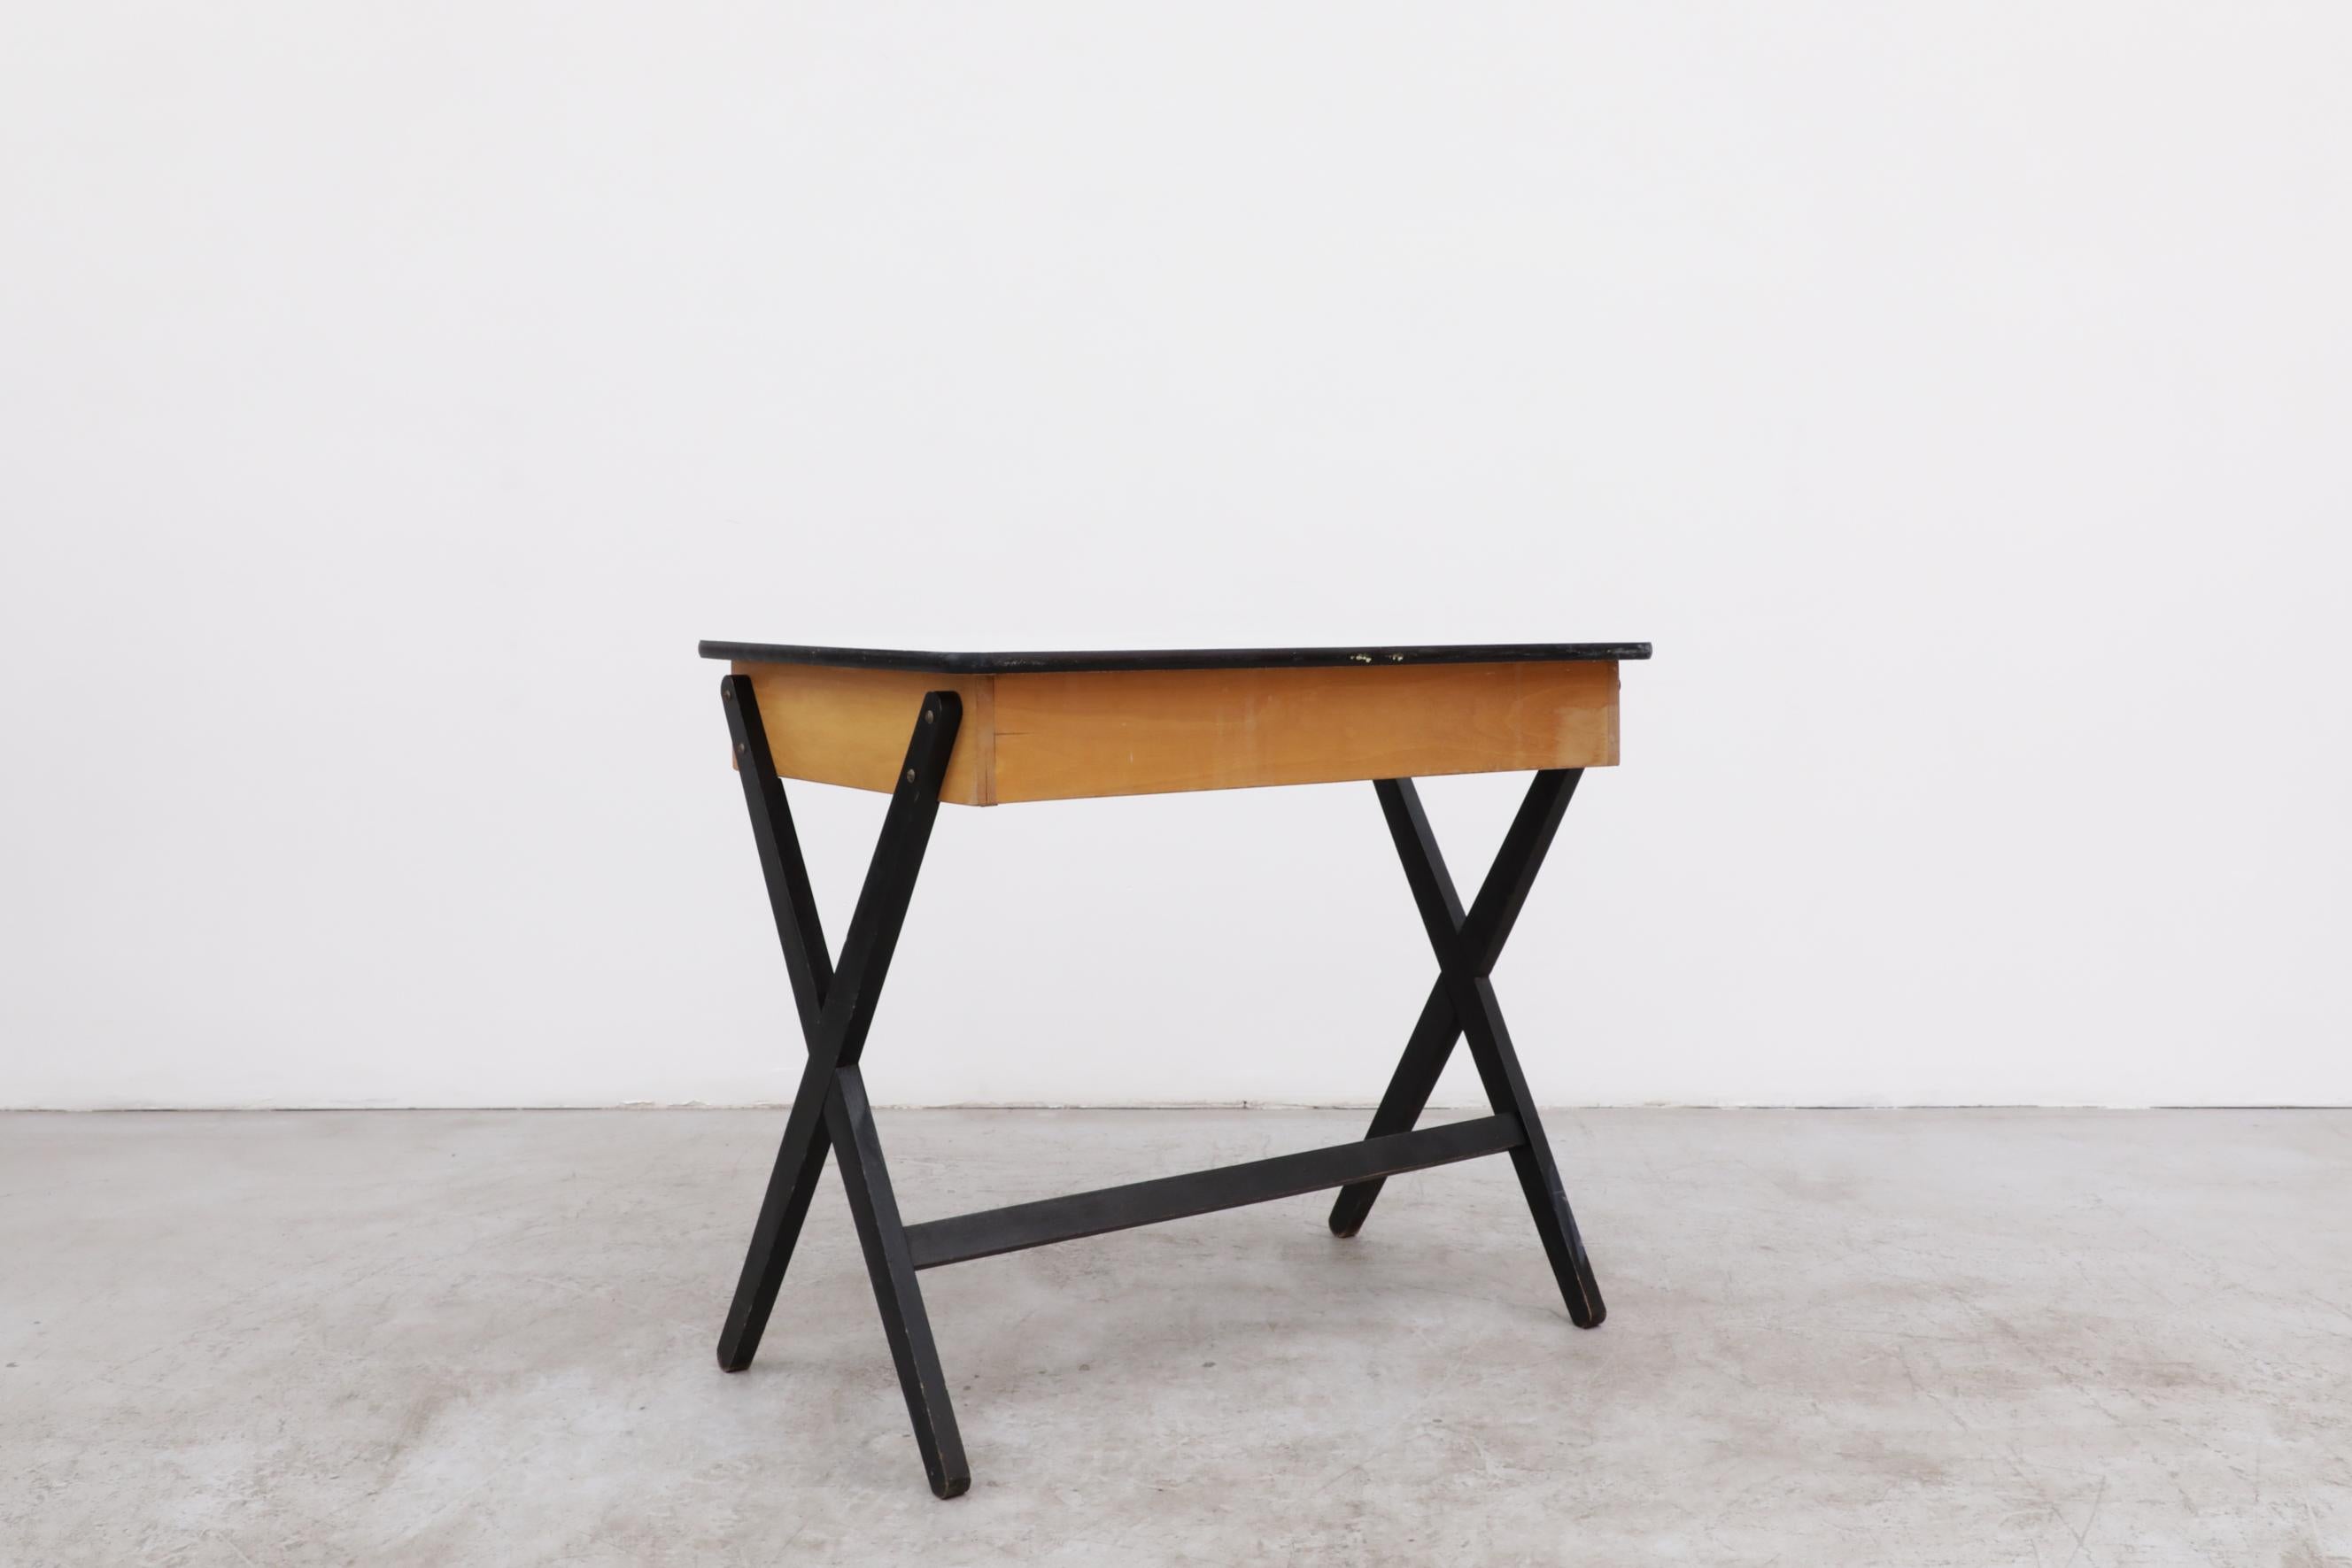 1954 Coen de Vries Desk in Birch w/ Ebony Base, Red Drawer and Formica Top For Sale 4